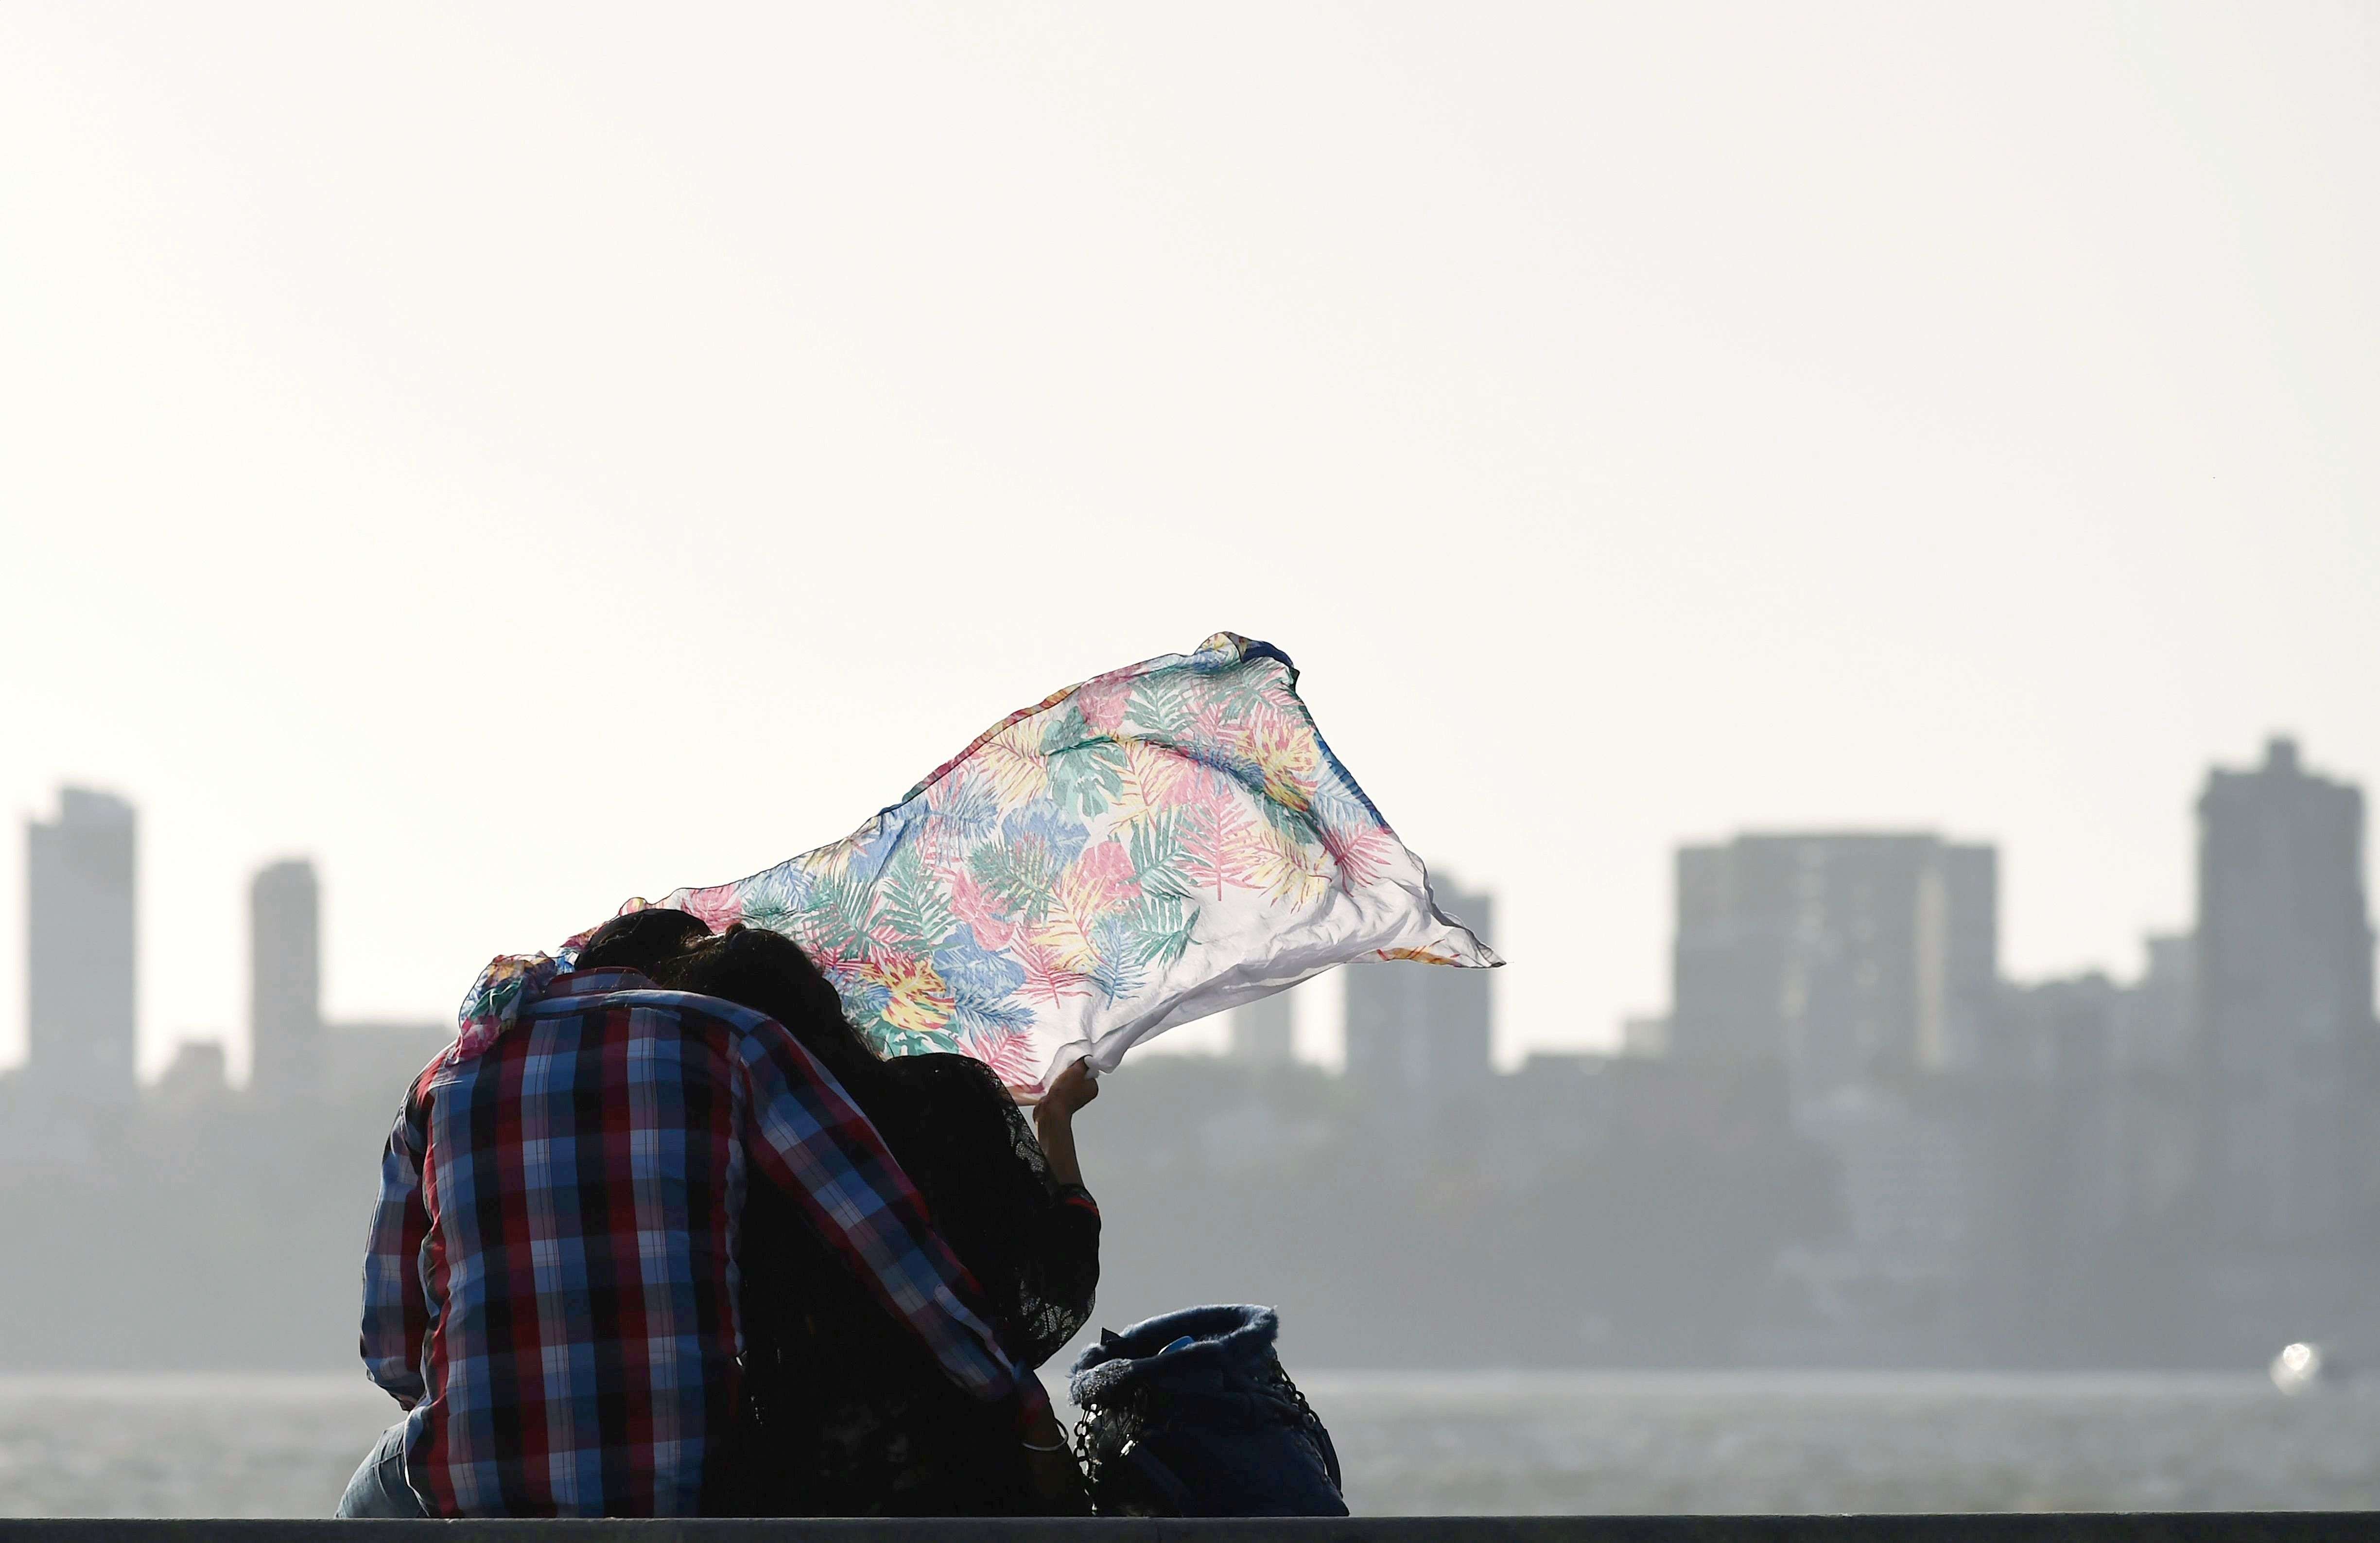 A gust of wind blows the veil of an Indian woman as a couple watch the sunset on the Marine Drive promenade in Mumbai on May 31, 2016.  India is ranked 118th, according to The World Happiness Report 2016, published by the Sustainable Development Solutions Network (SDSN), a global initiative of the United Nations. Denmark took the top spot as the happiest country in the world, displacing Switzerland. The report said that India was among the group of 10 countries witnessing the biggest happiness declines, along with Venezuela, Saudi Arabia, Egypt, Yemen and Botswana. / AFP PHOTO / INDRANIL MUKHERJEE